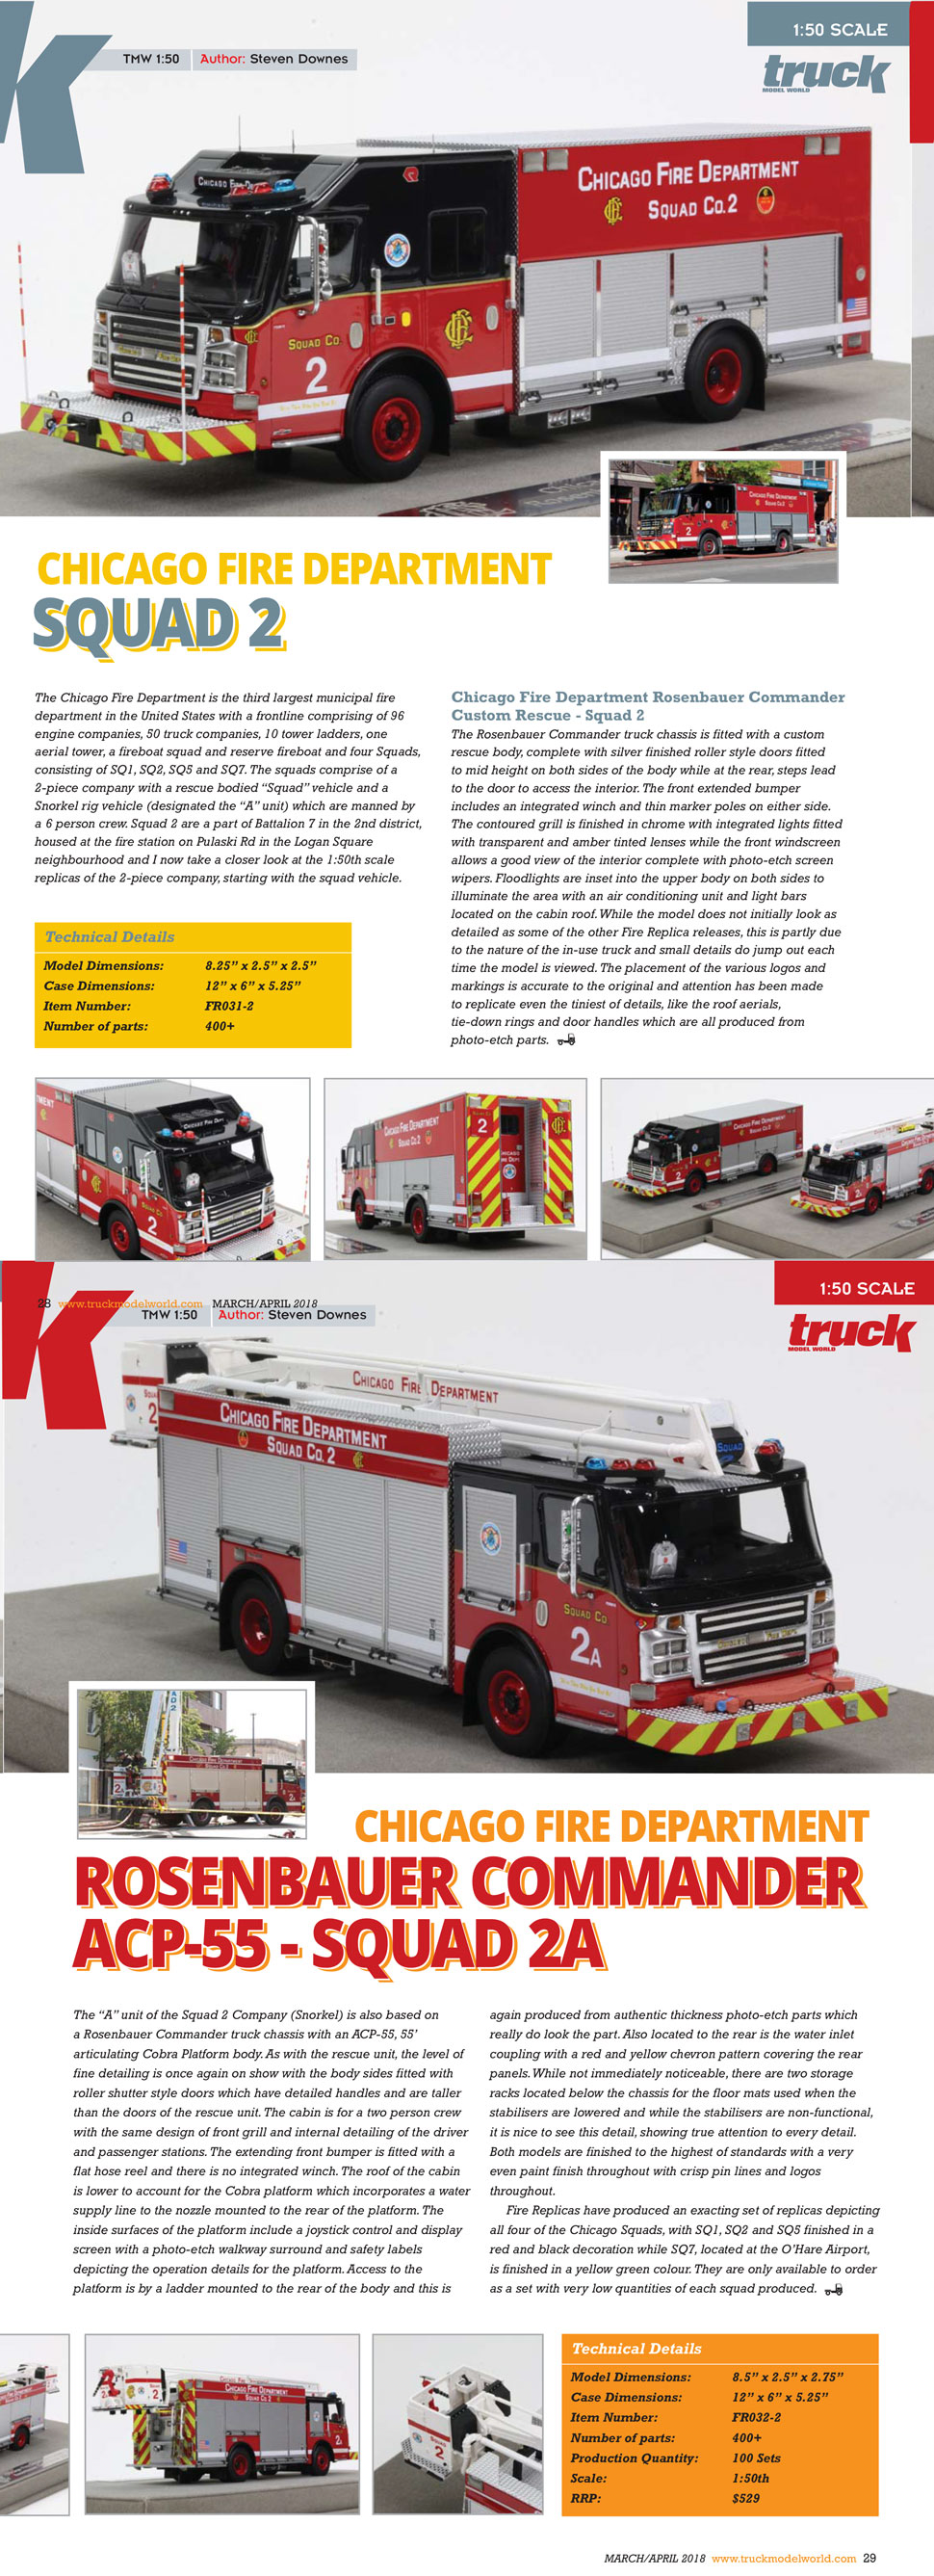 As seen in Truck Model World, March/April 2018 issue